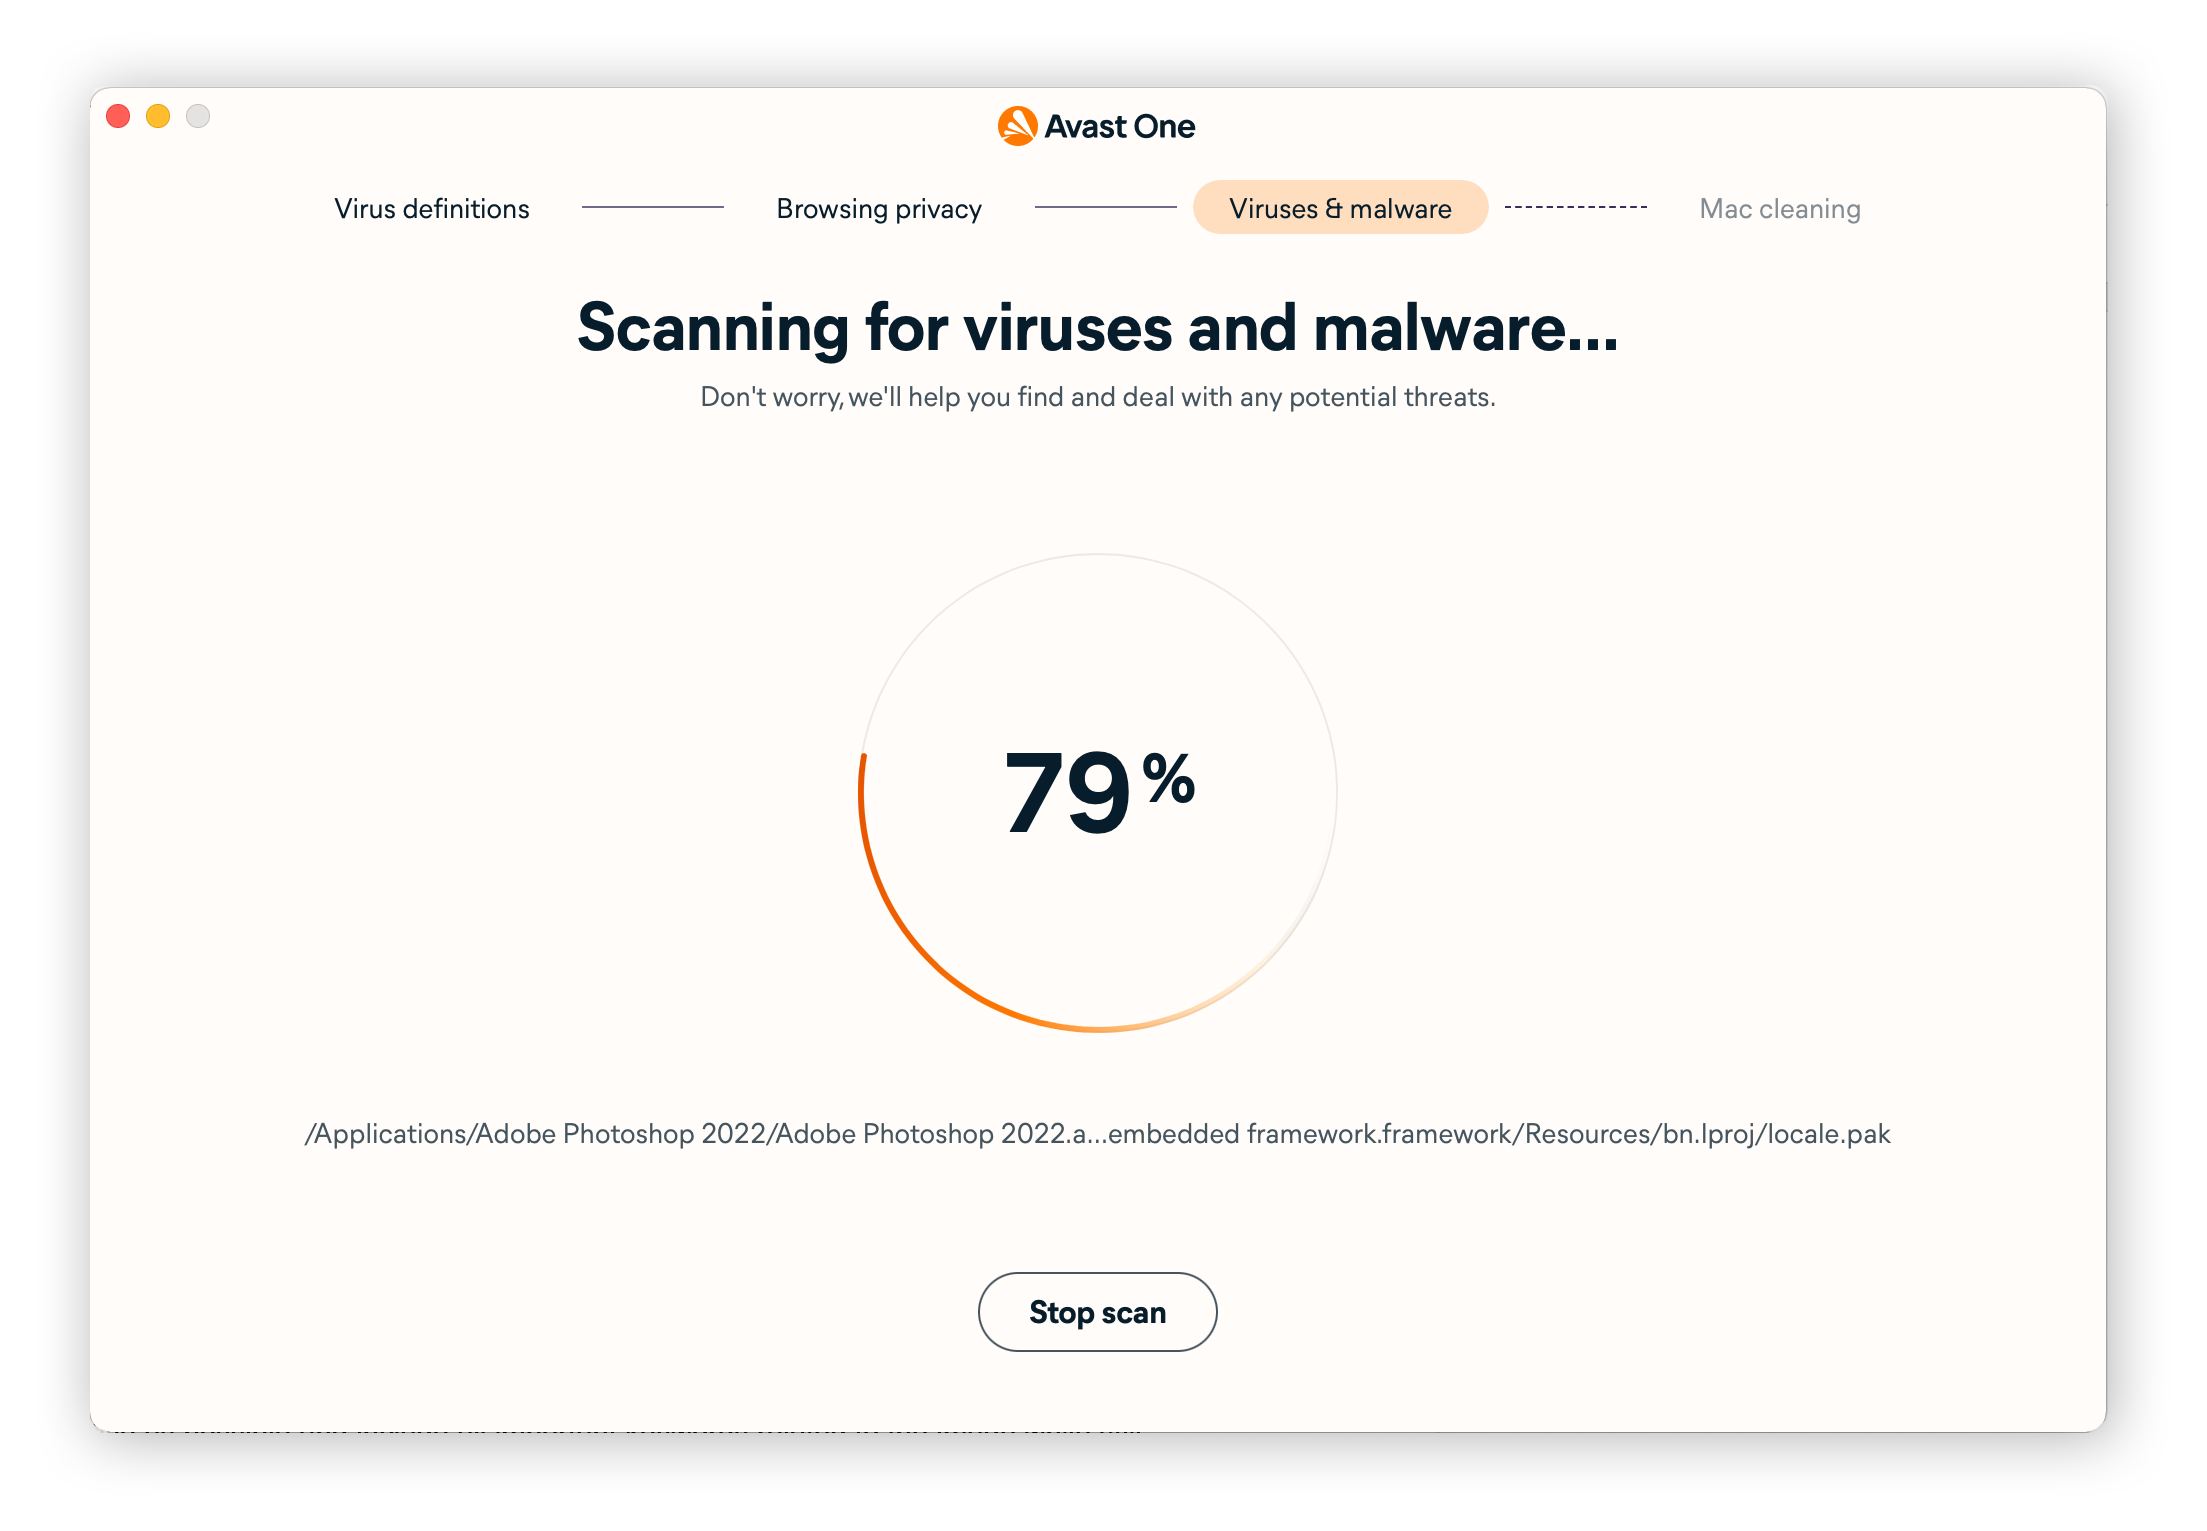 Scanning for computer viruses with Avast One.